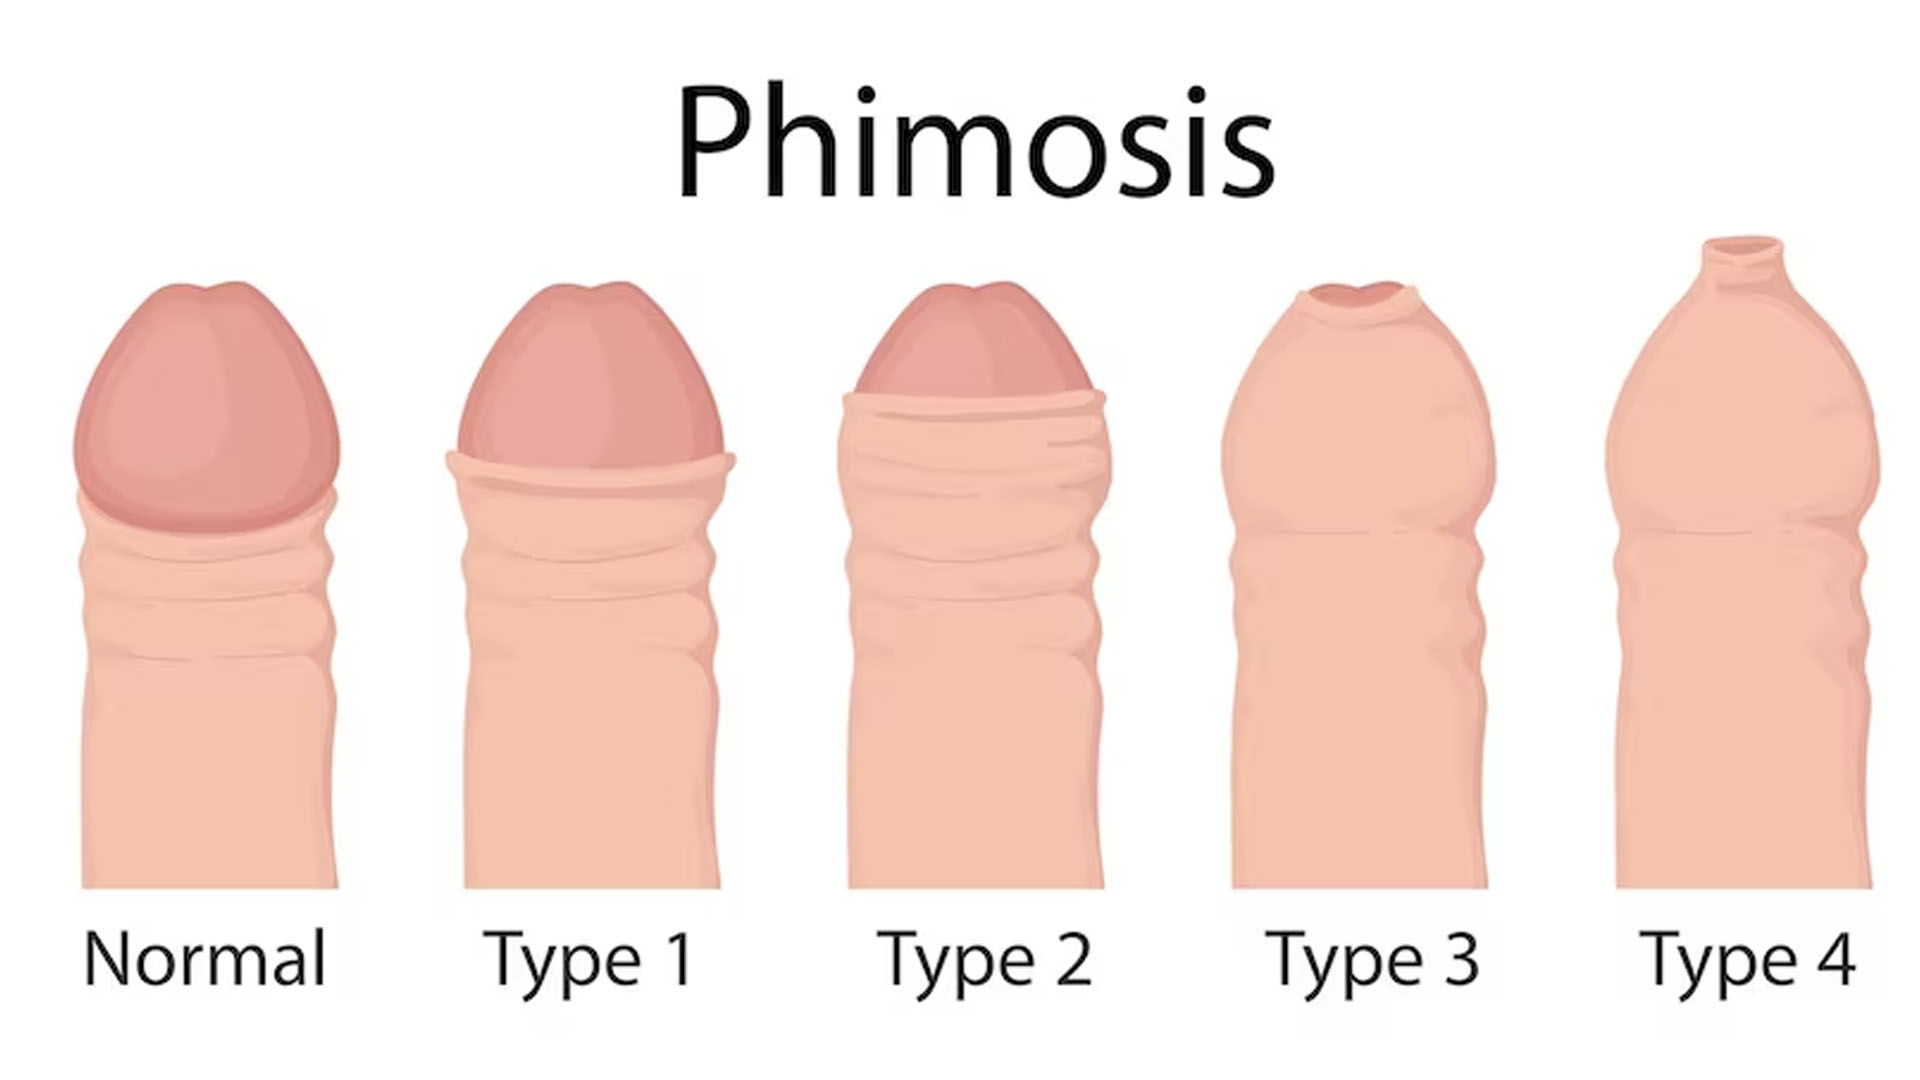 What are the Home Remedies for Phimosis?